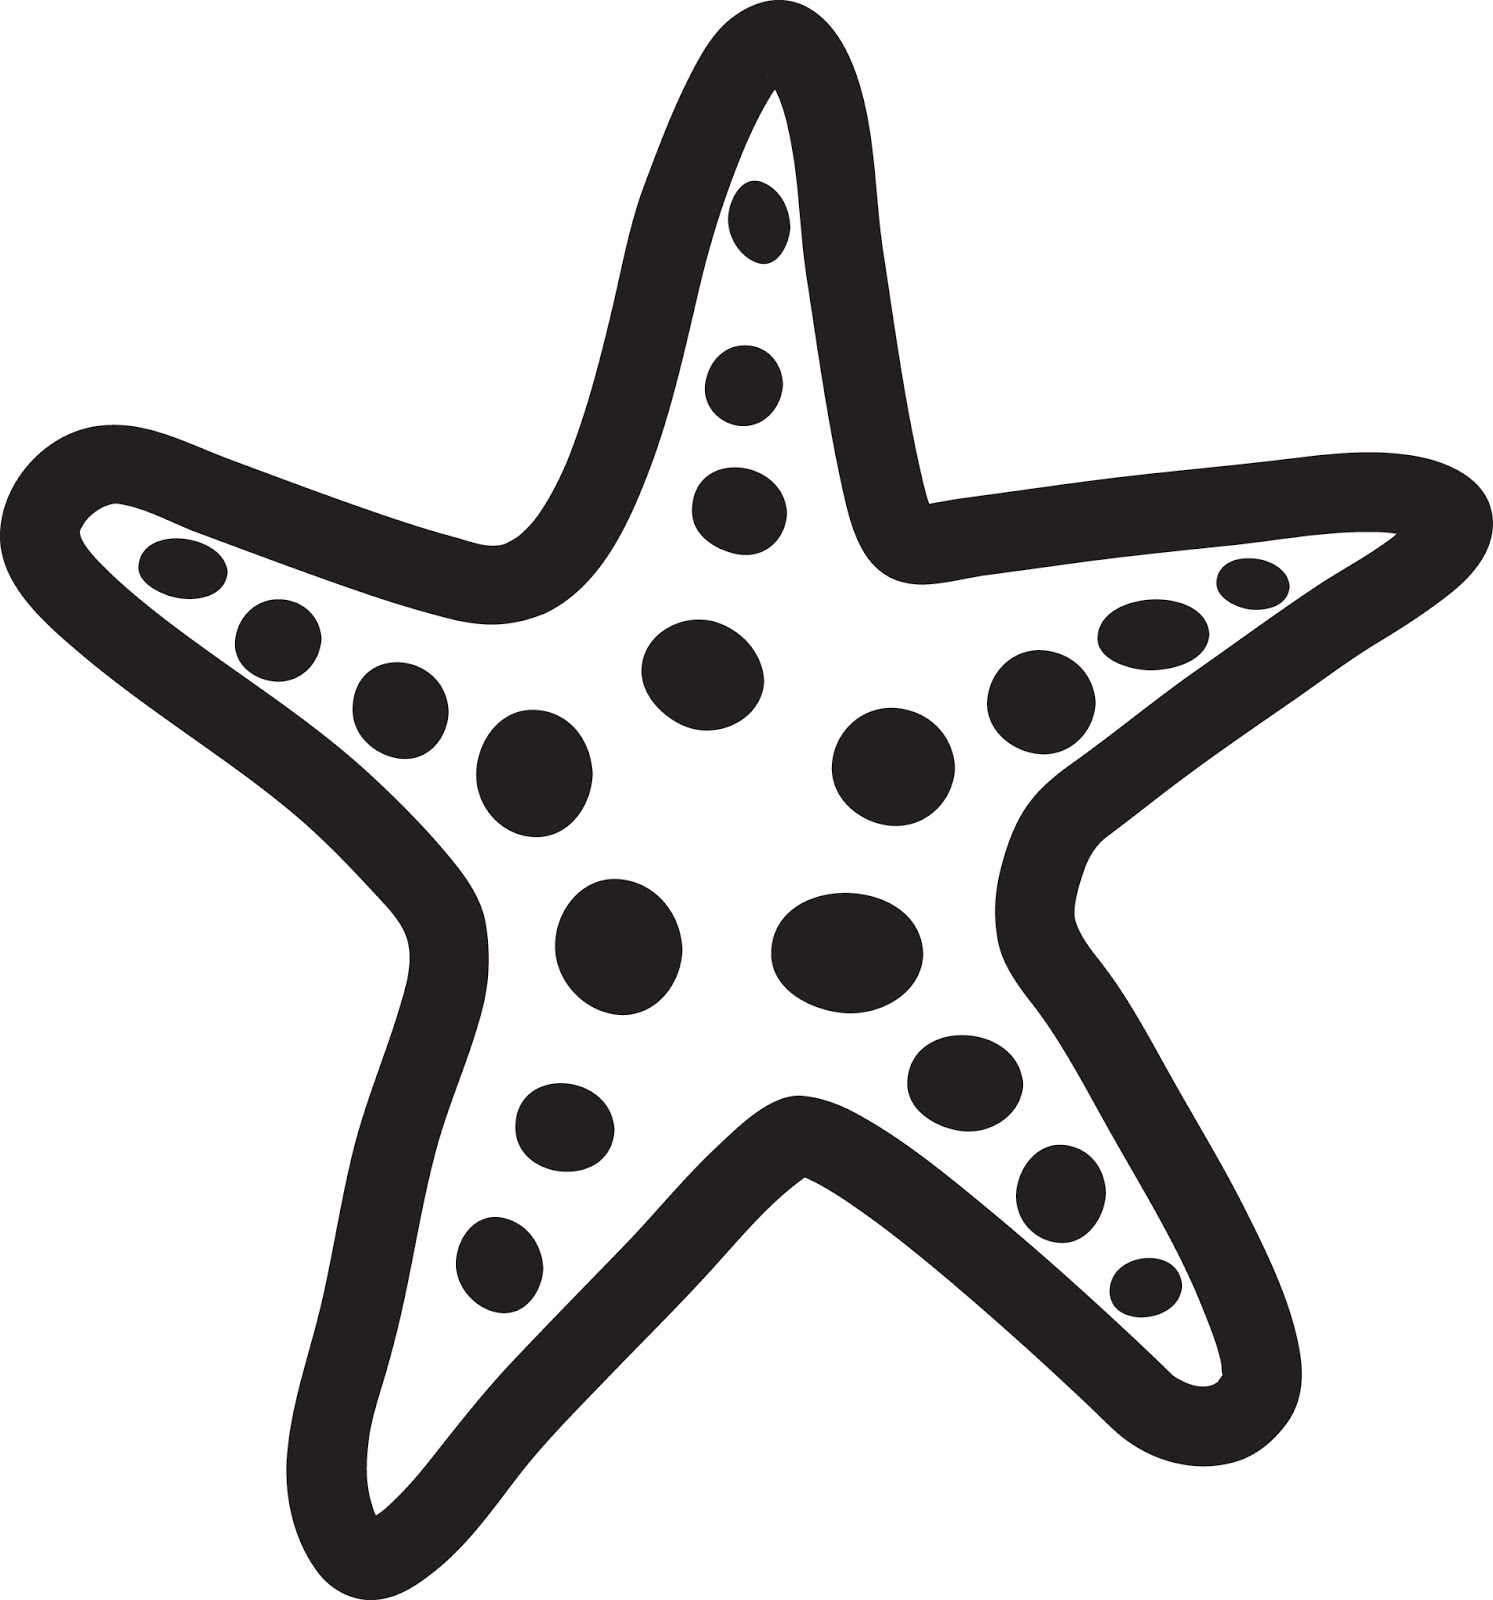 To starfish orange red clip clipart free clip art images image 0